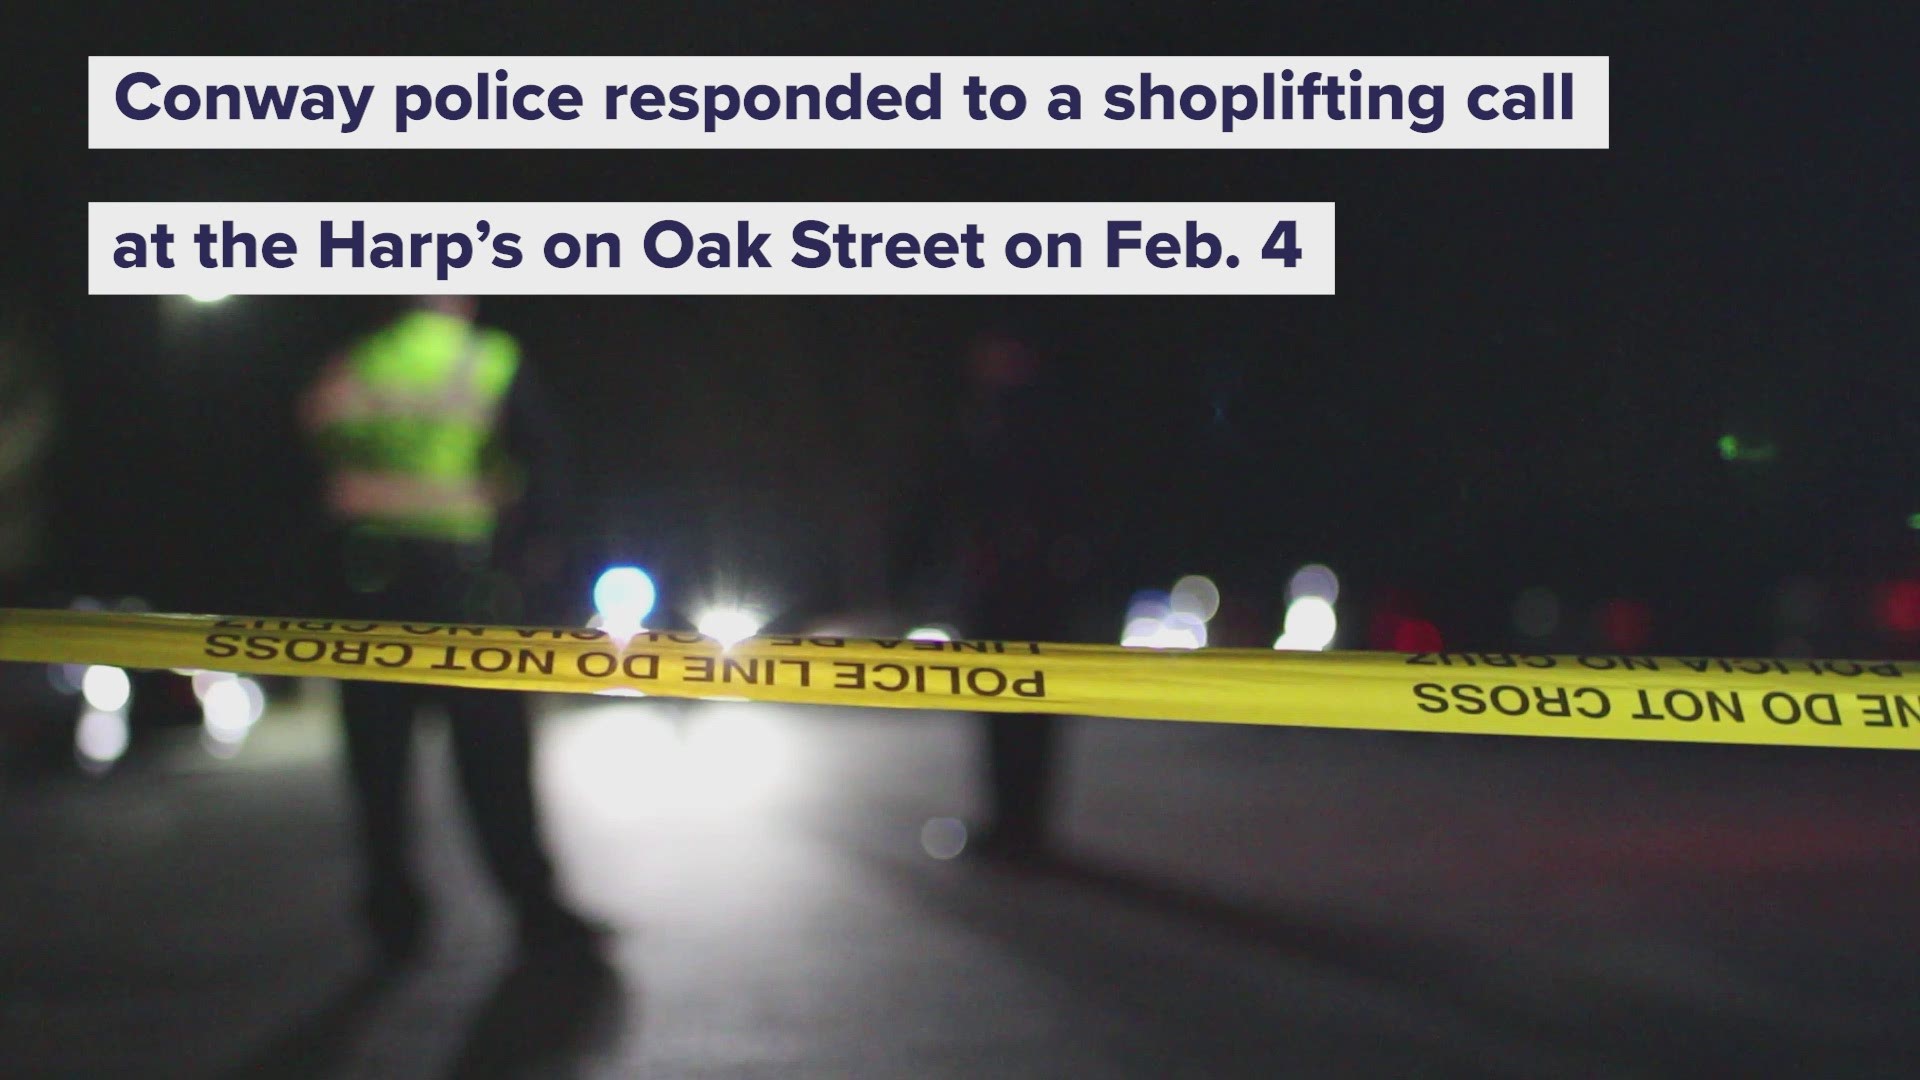 A man has died from injuries during a struggle with police arresting him for allegedly shoplifting a Conway Harp's.